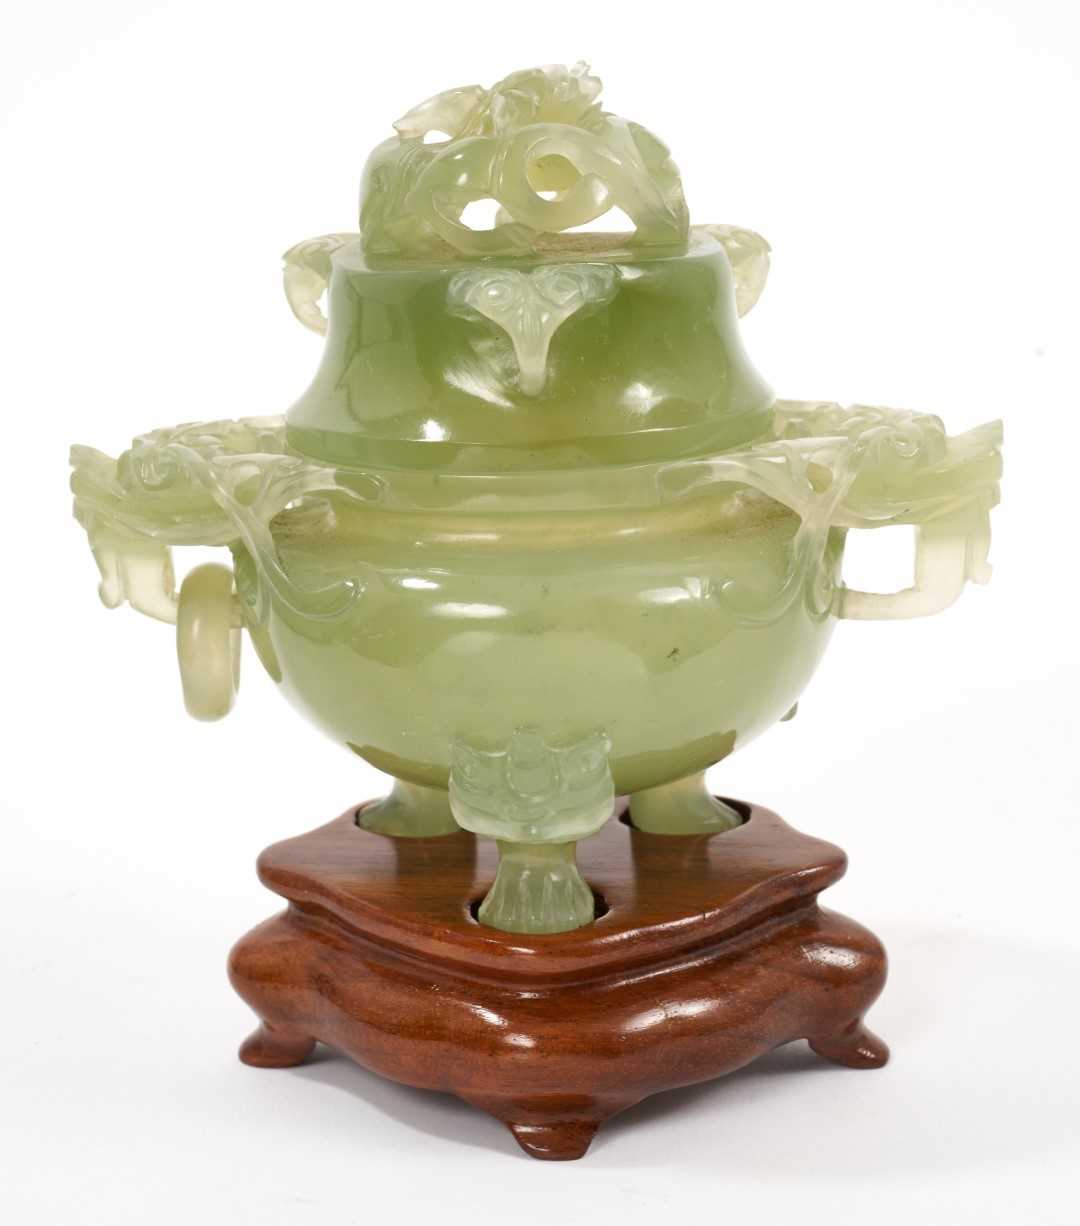 Chinese carved green jade pot and cover on a wooden stand